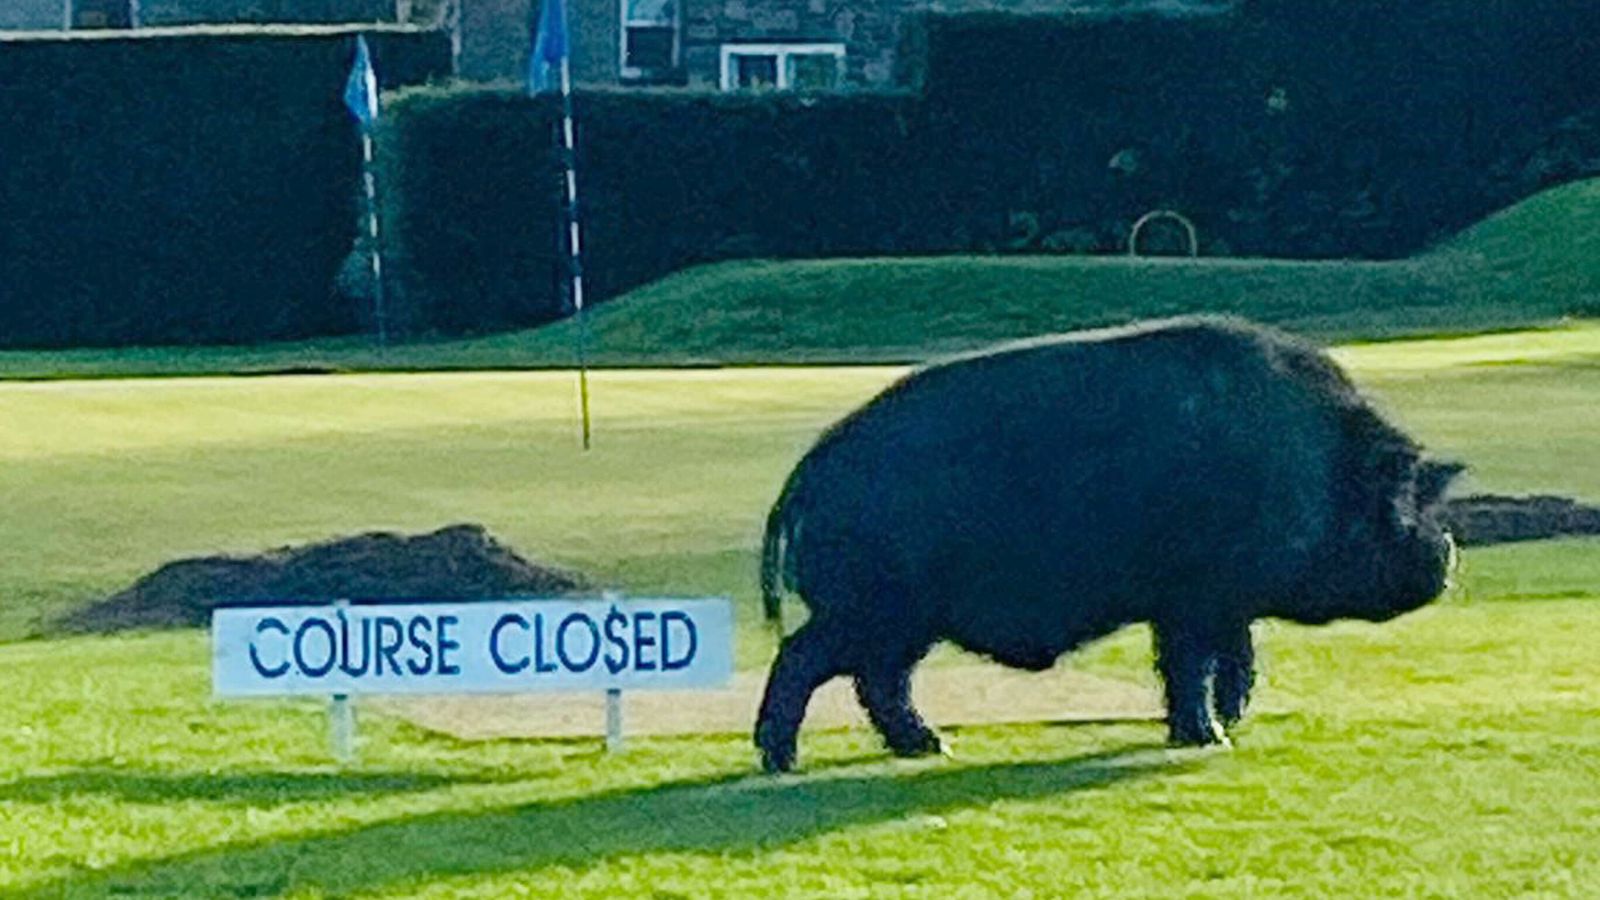 Two injured as pigs storm golf course in West Yorkshire